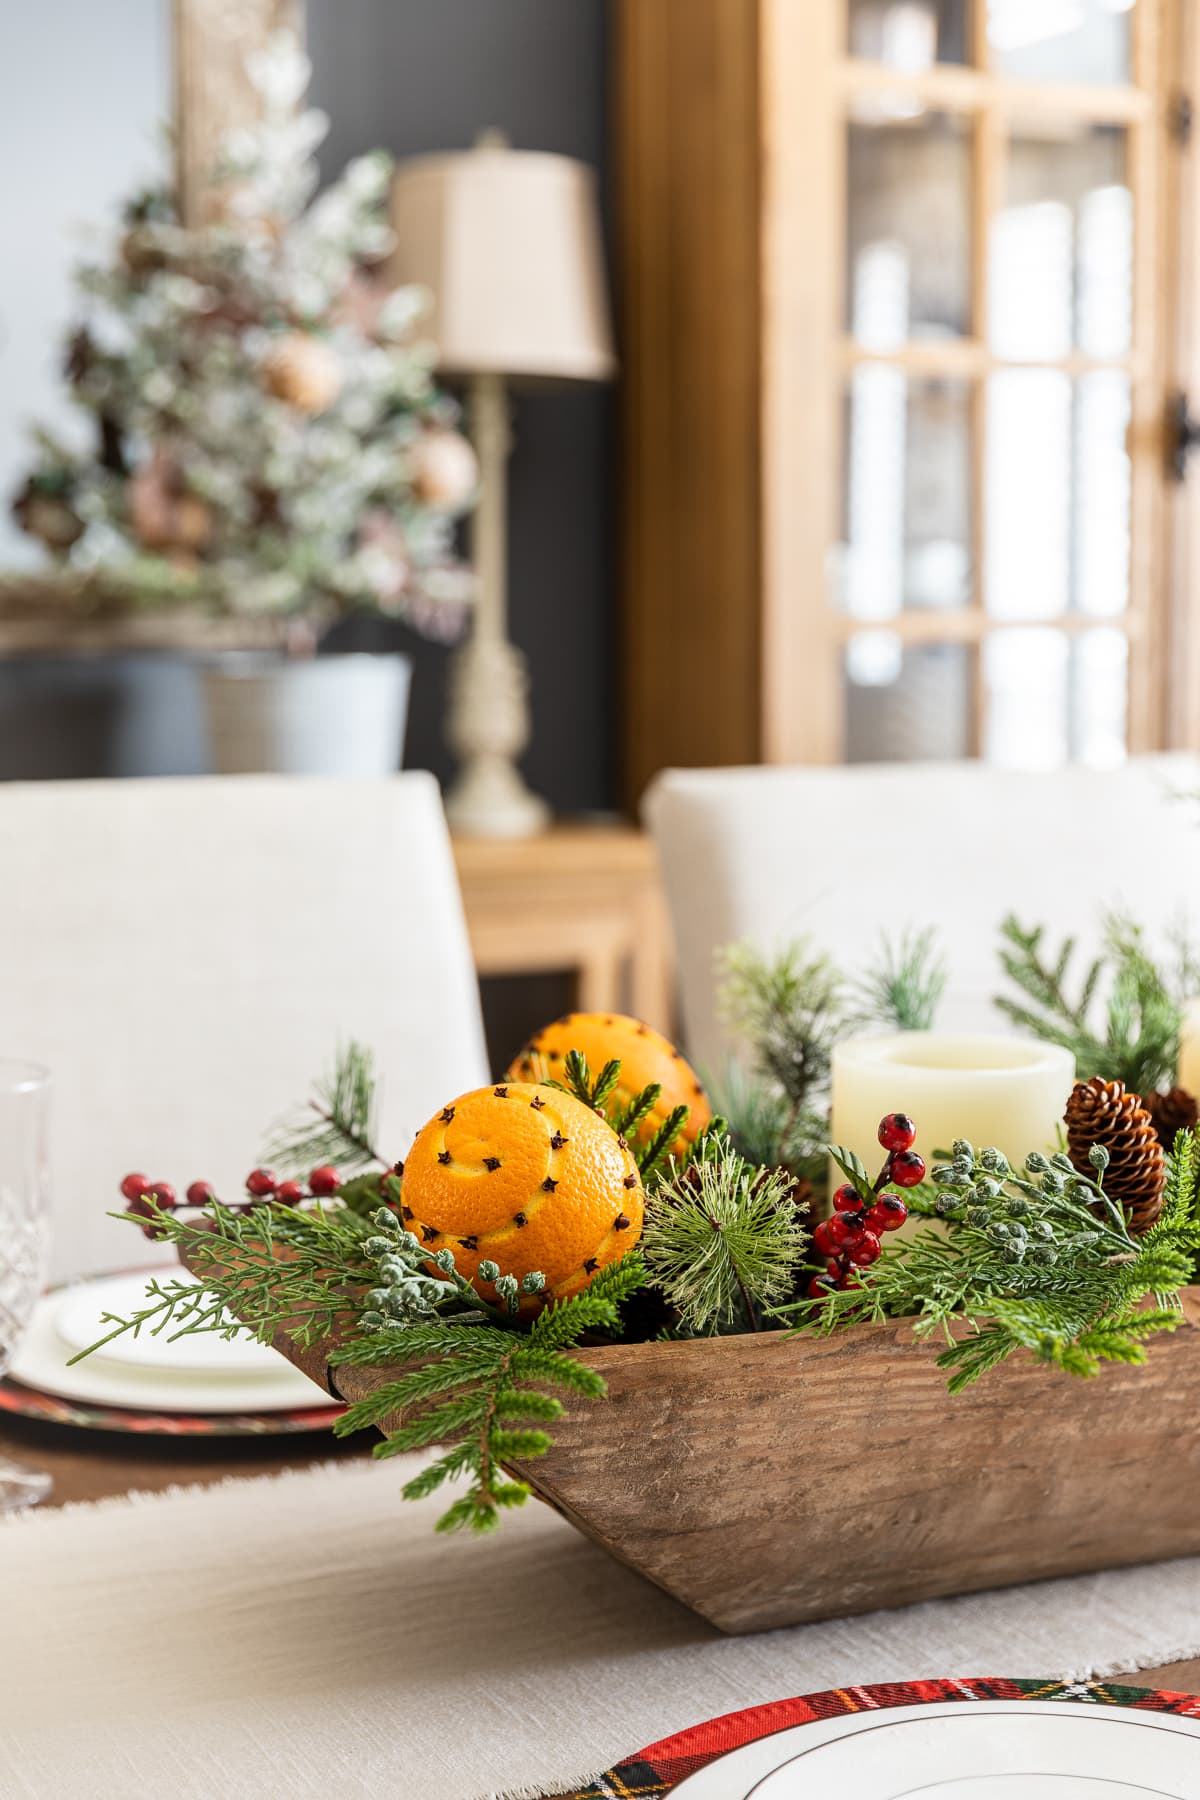 Dough bowl Christmas centerpiece filled with evergreen stems, berries, and orange pomander balls sitting on dining room table.